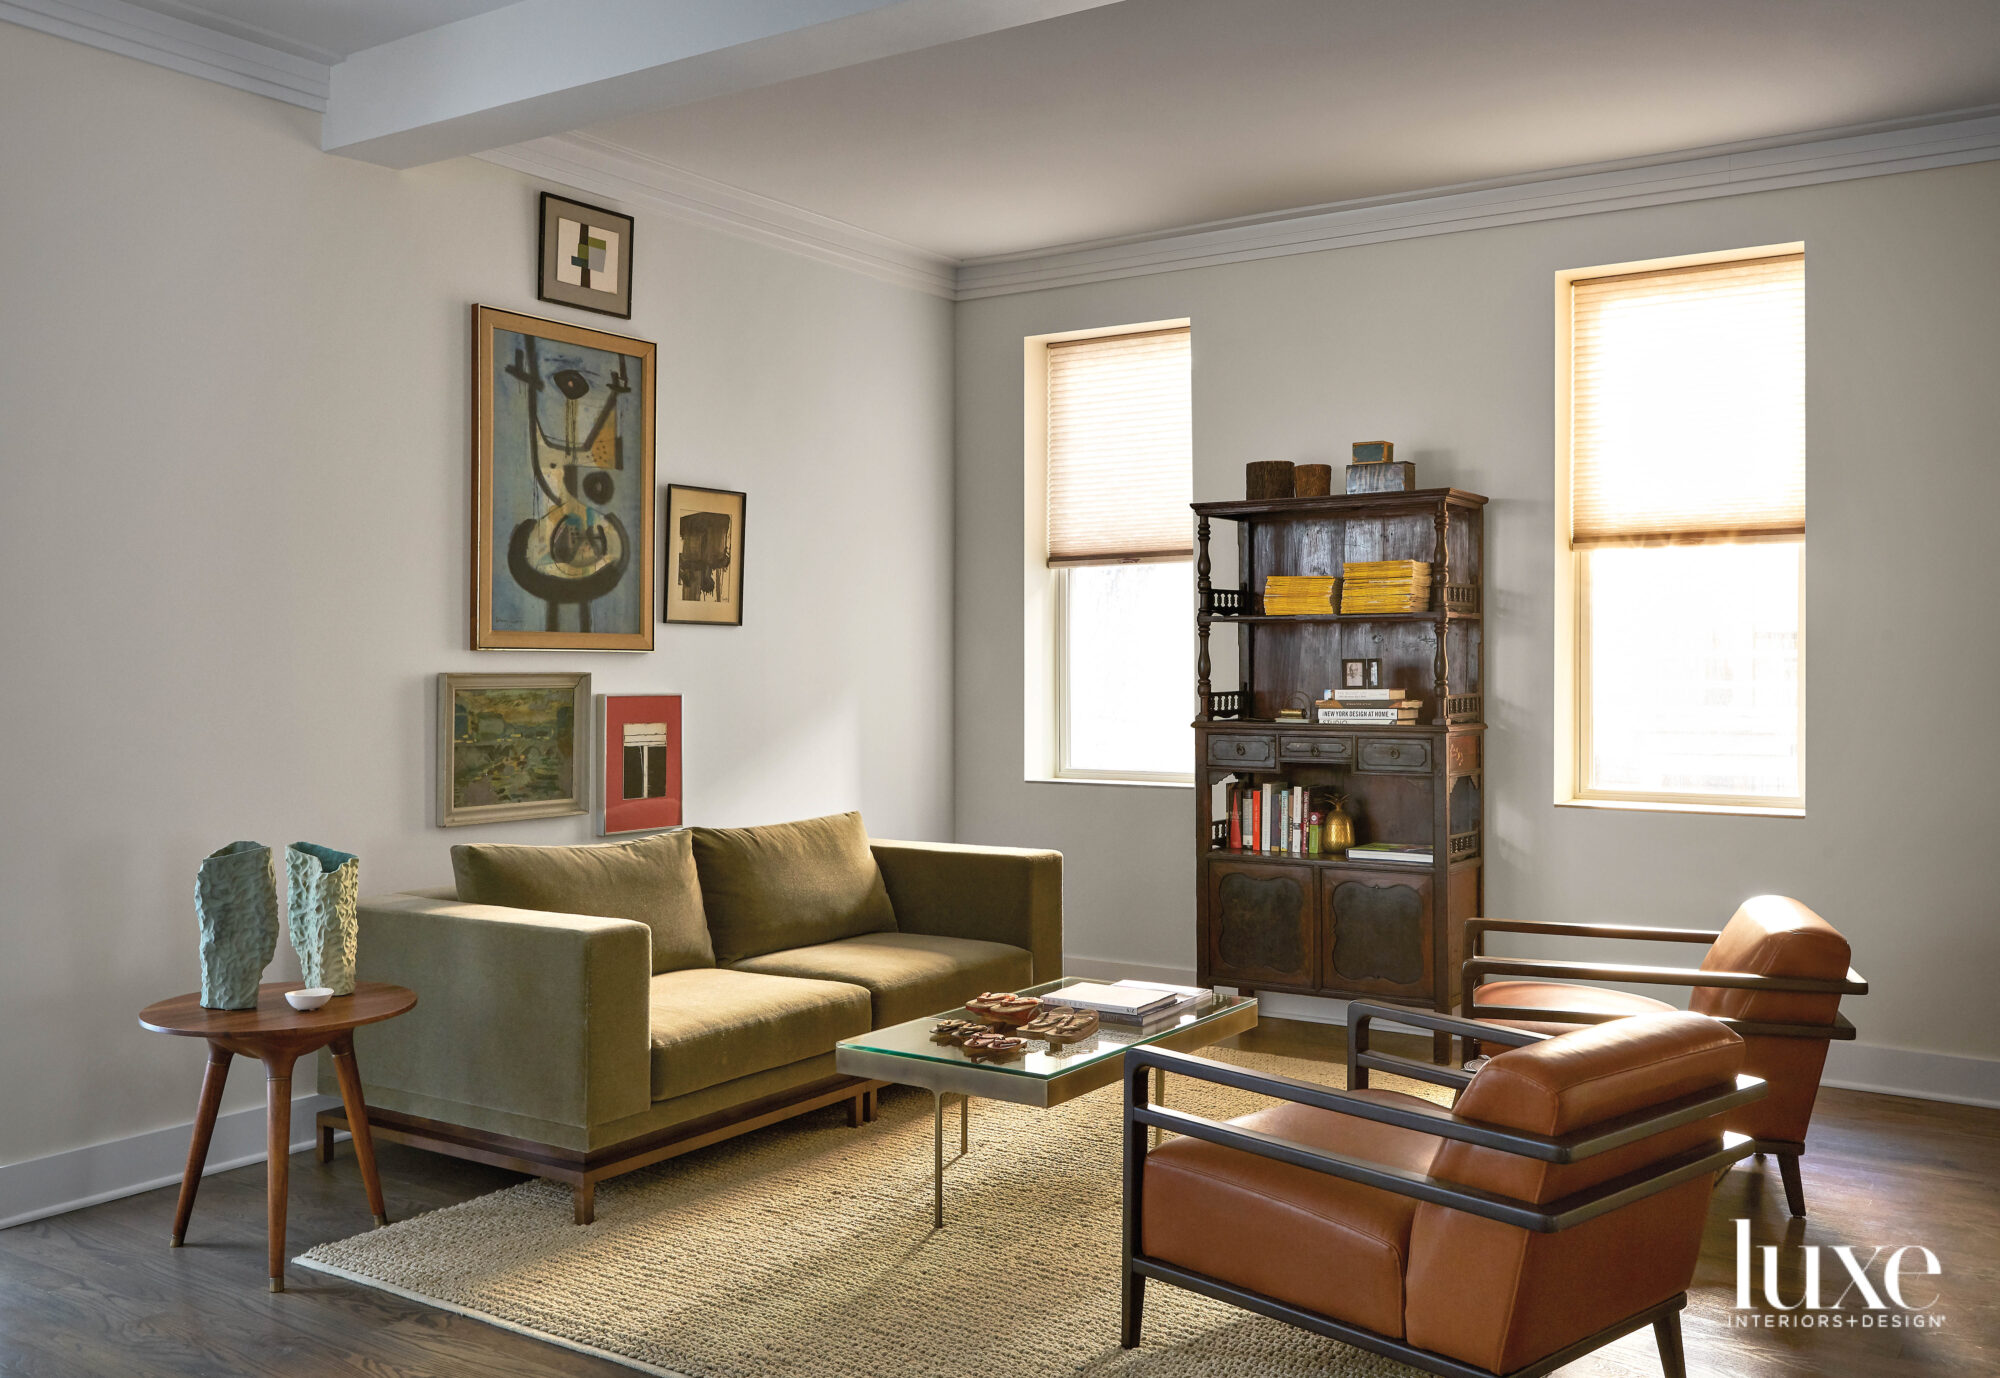 Eclectic artwork hangs above an olive green couch, which faces two leather armchairs.